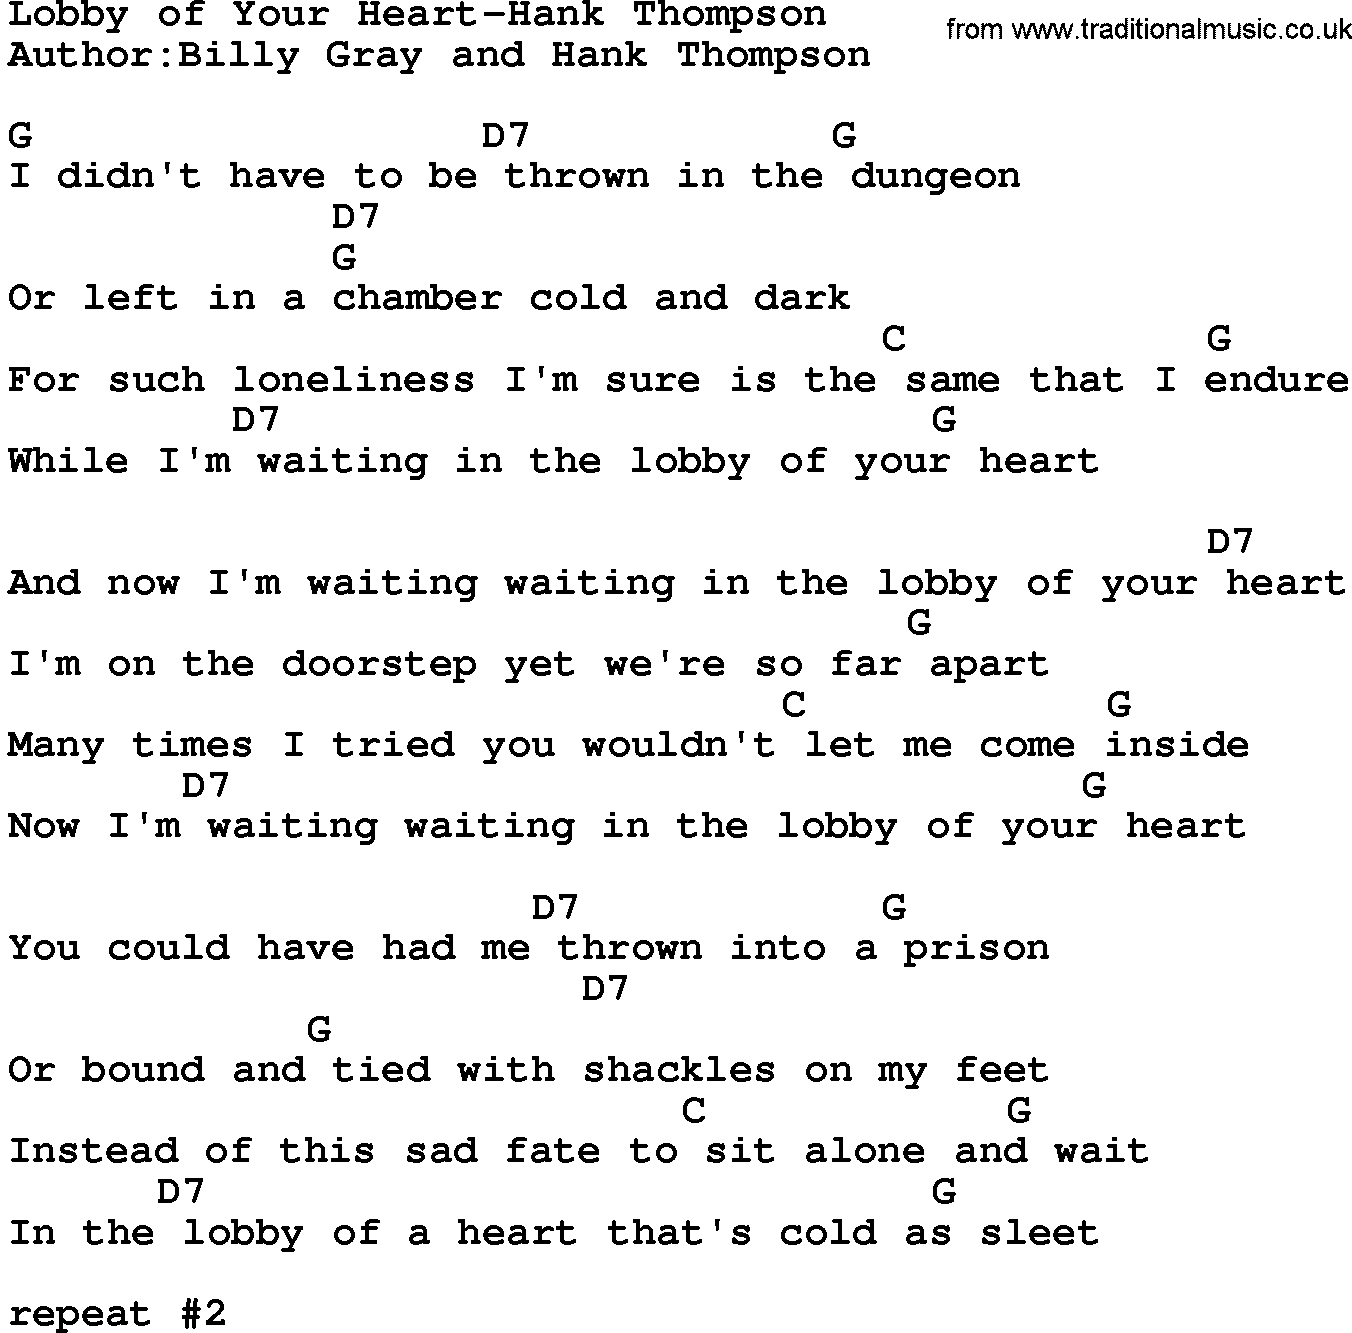 Country music song: Lobby Of Your Heart-Hank Thompson lyrics and chords